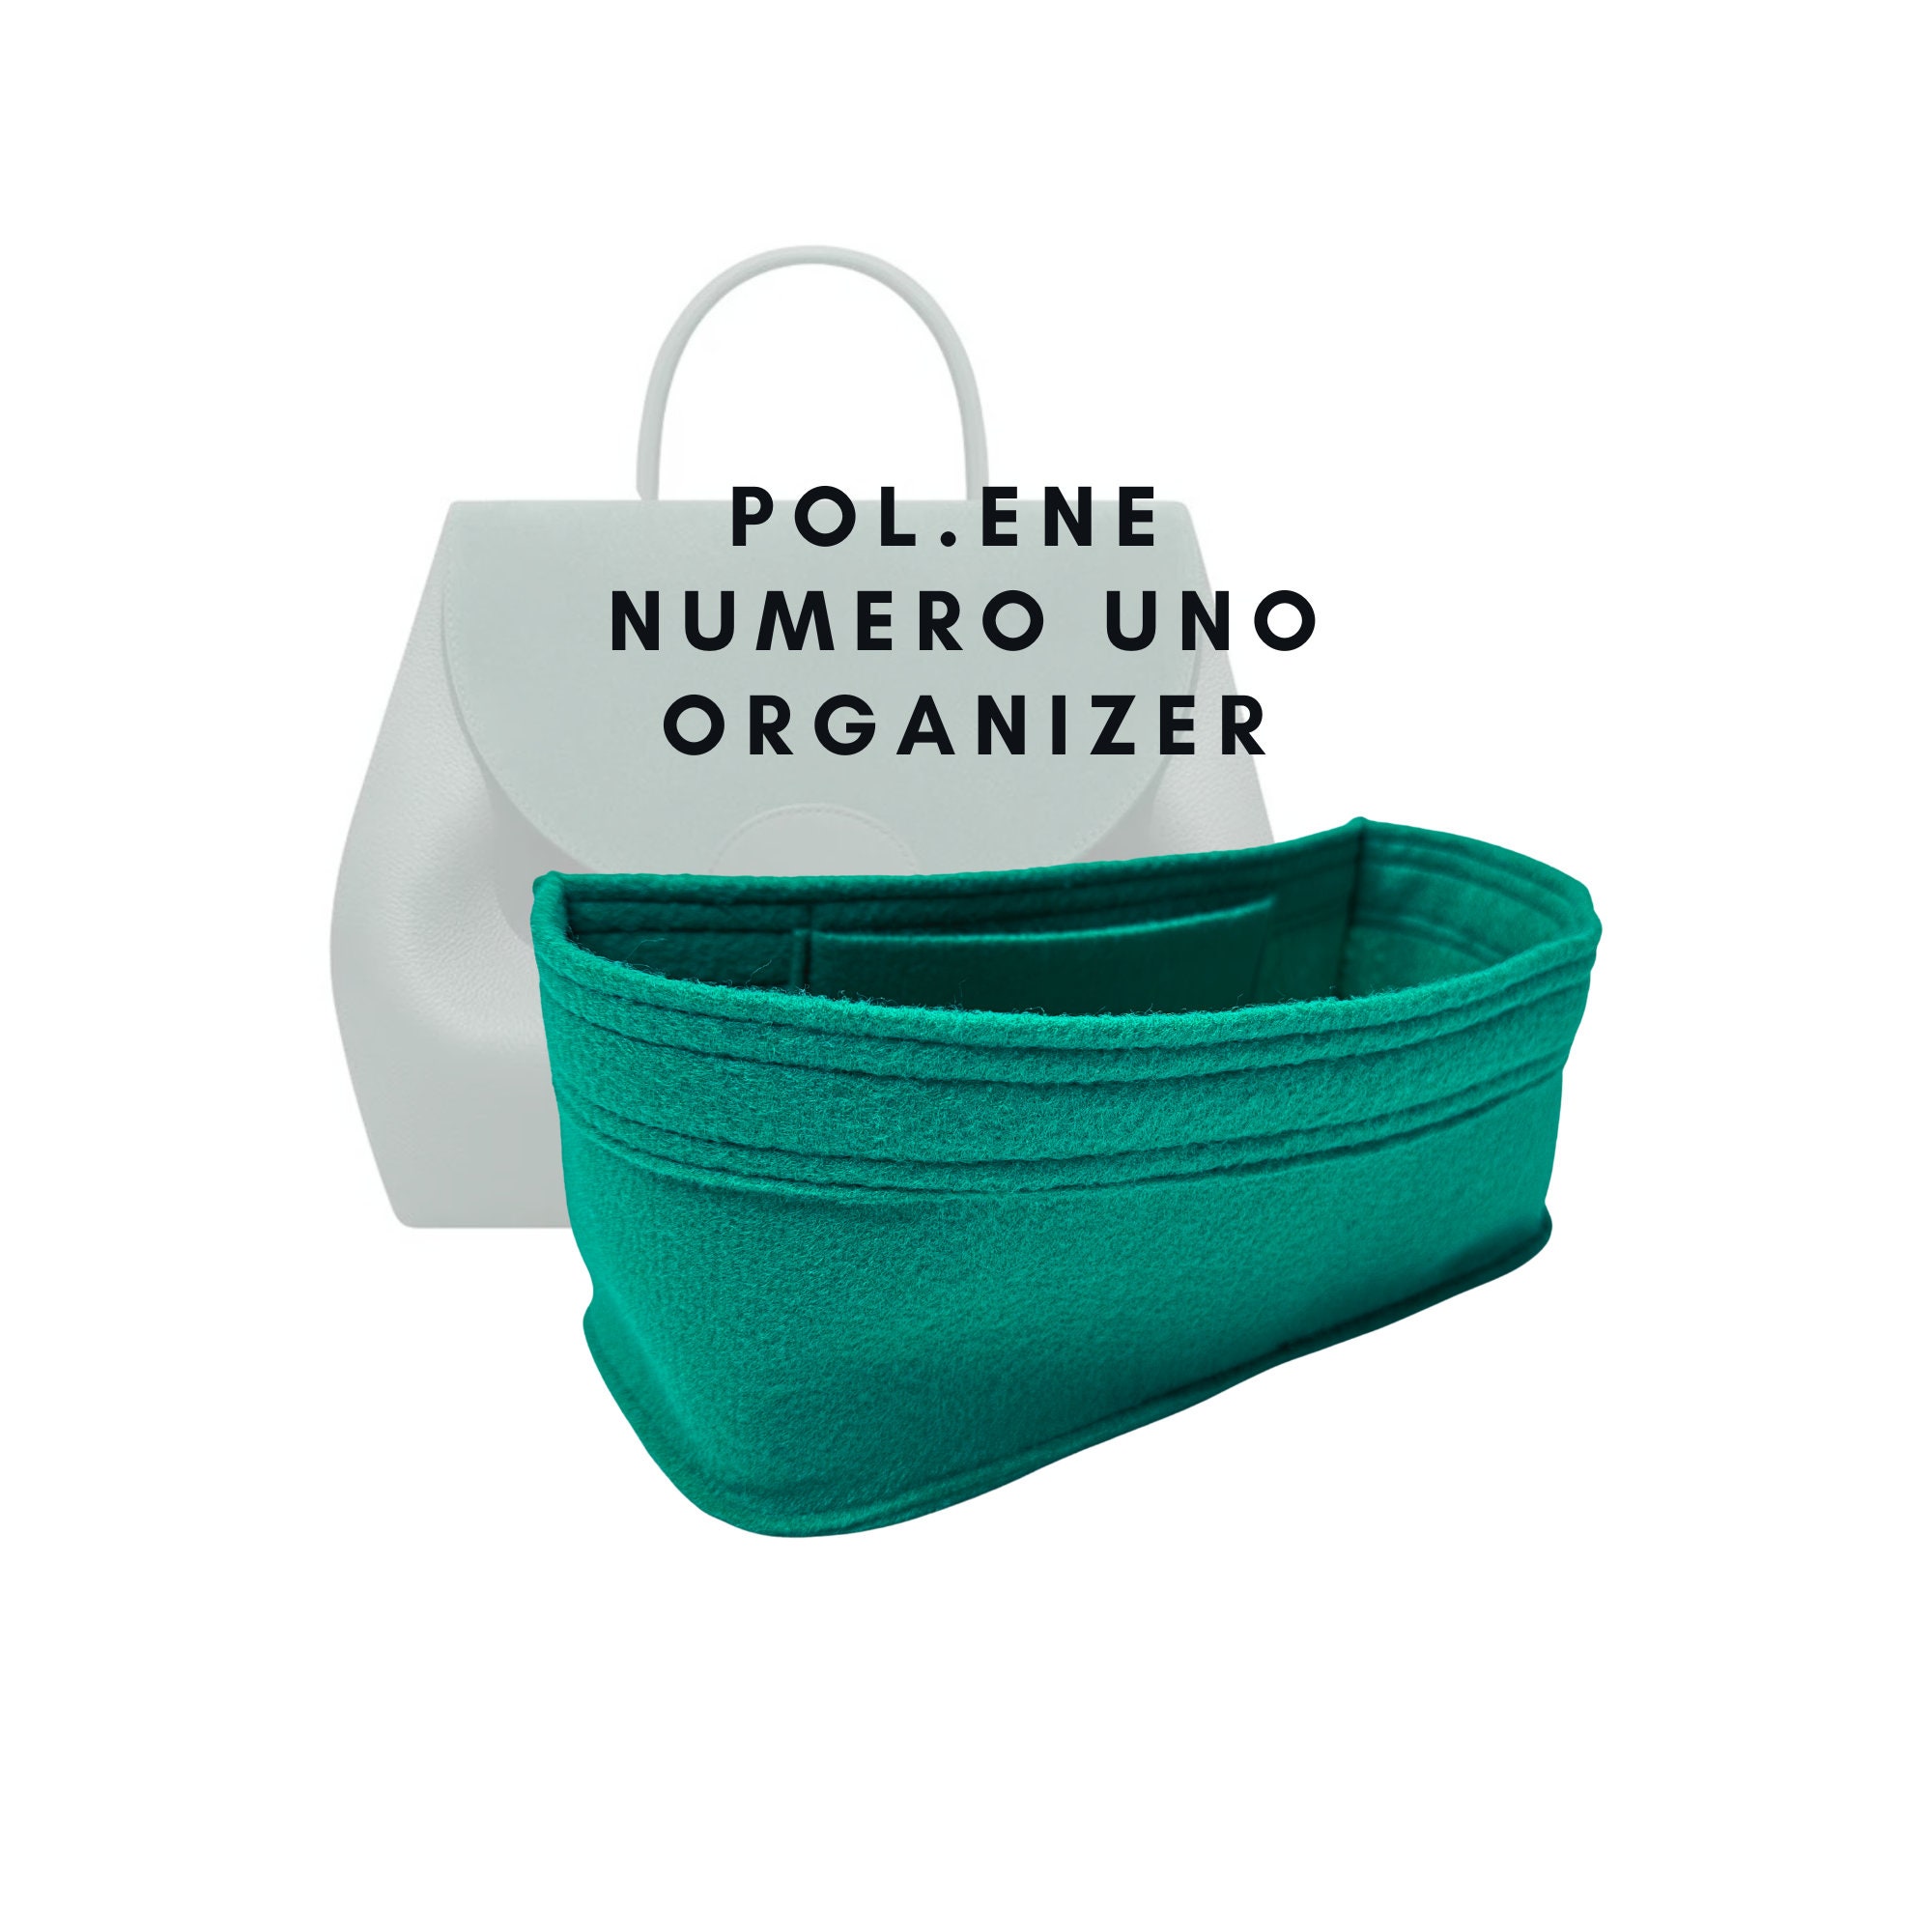 Polene Numero Un - Why are there so many on the resale market? : r